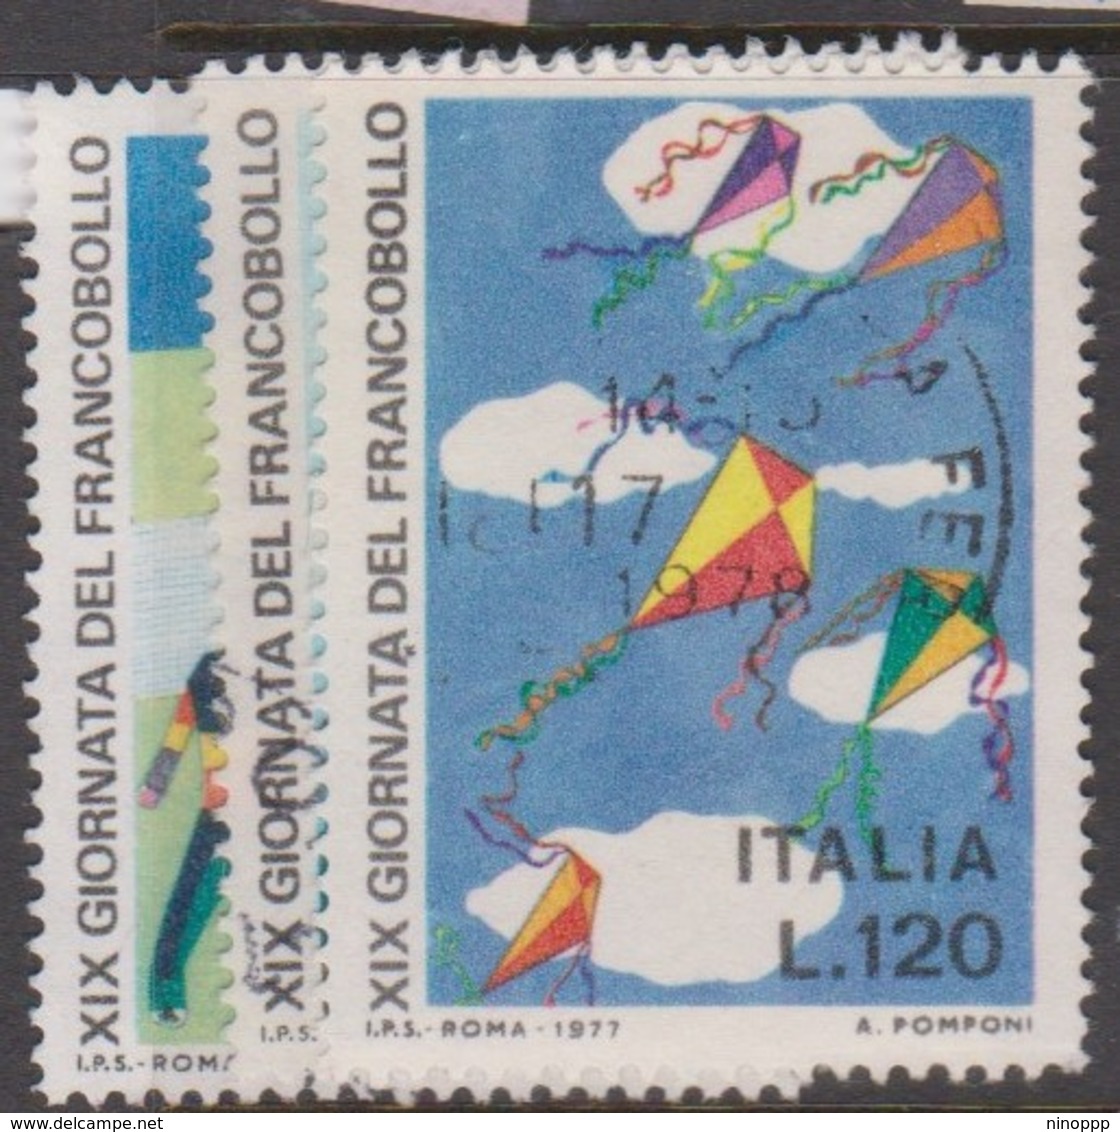 Italy Republic S 1389-1391 1977 Stamp Day ,used - 1971-80: Used